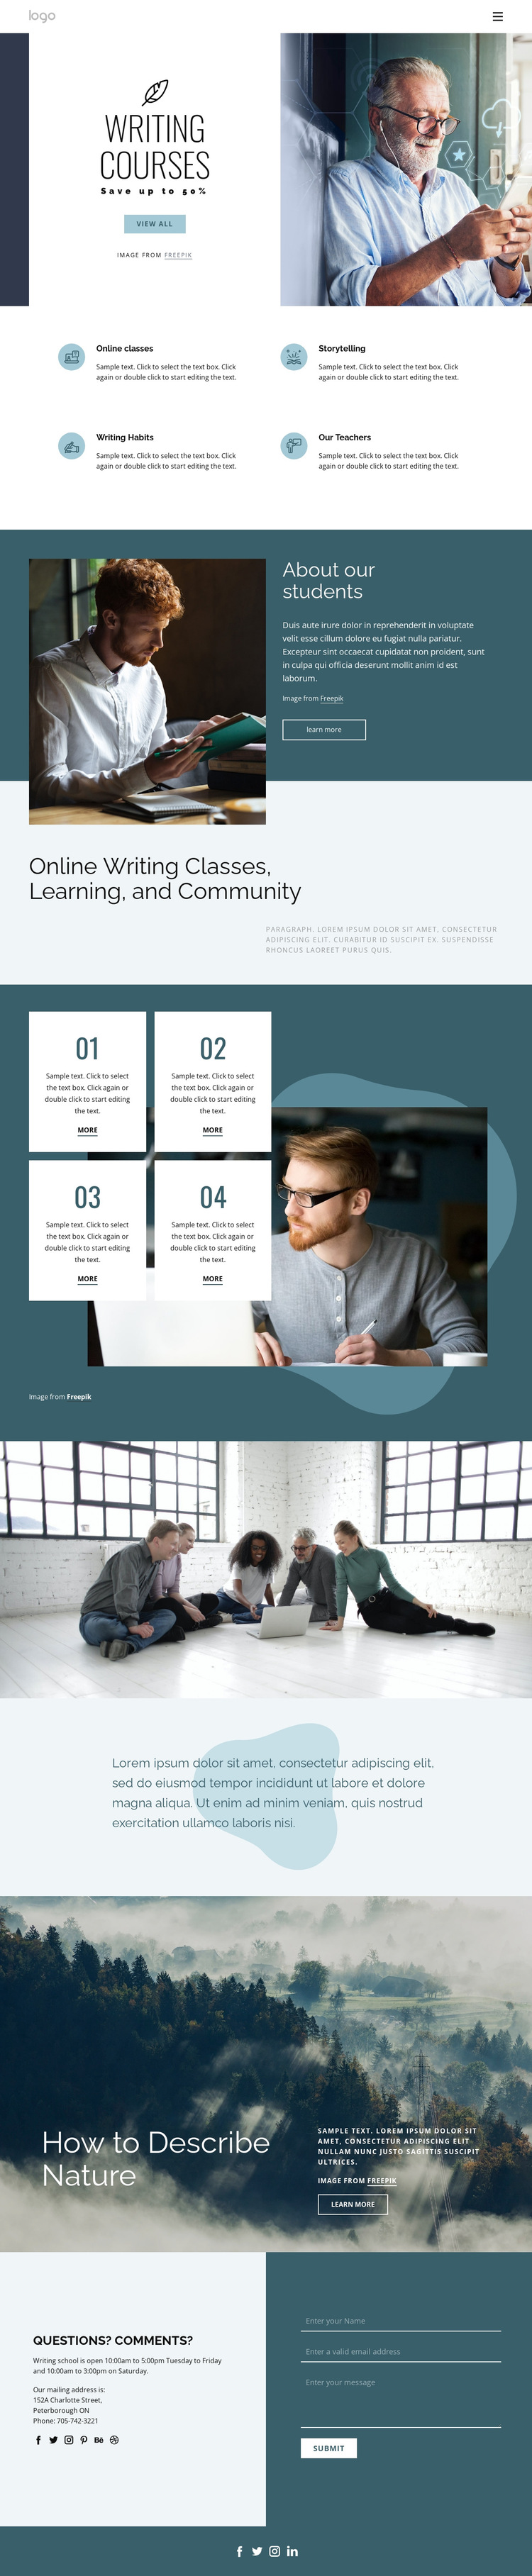 Creative writing courses HTML5 Template